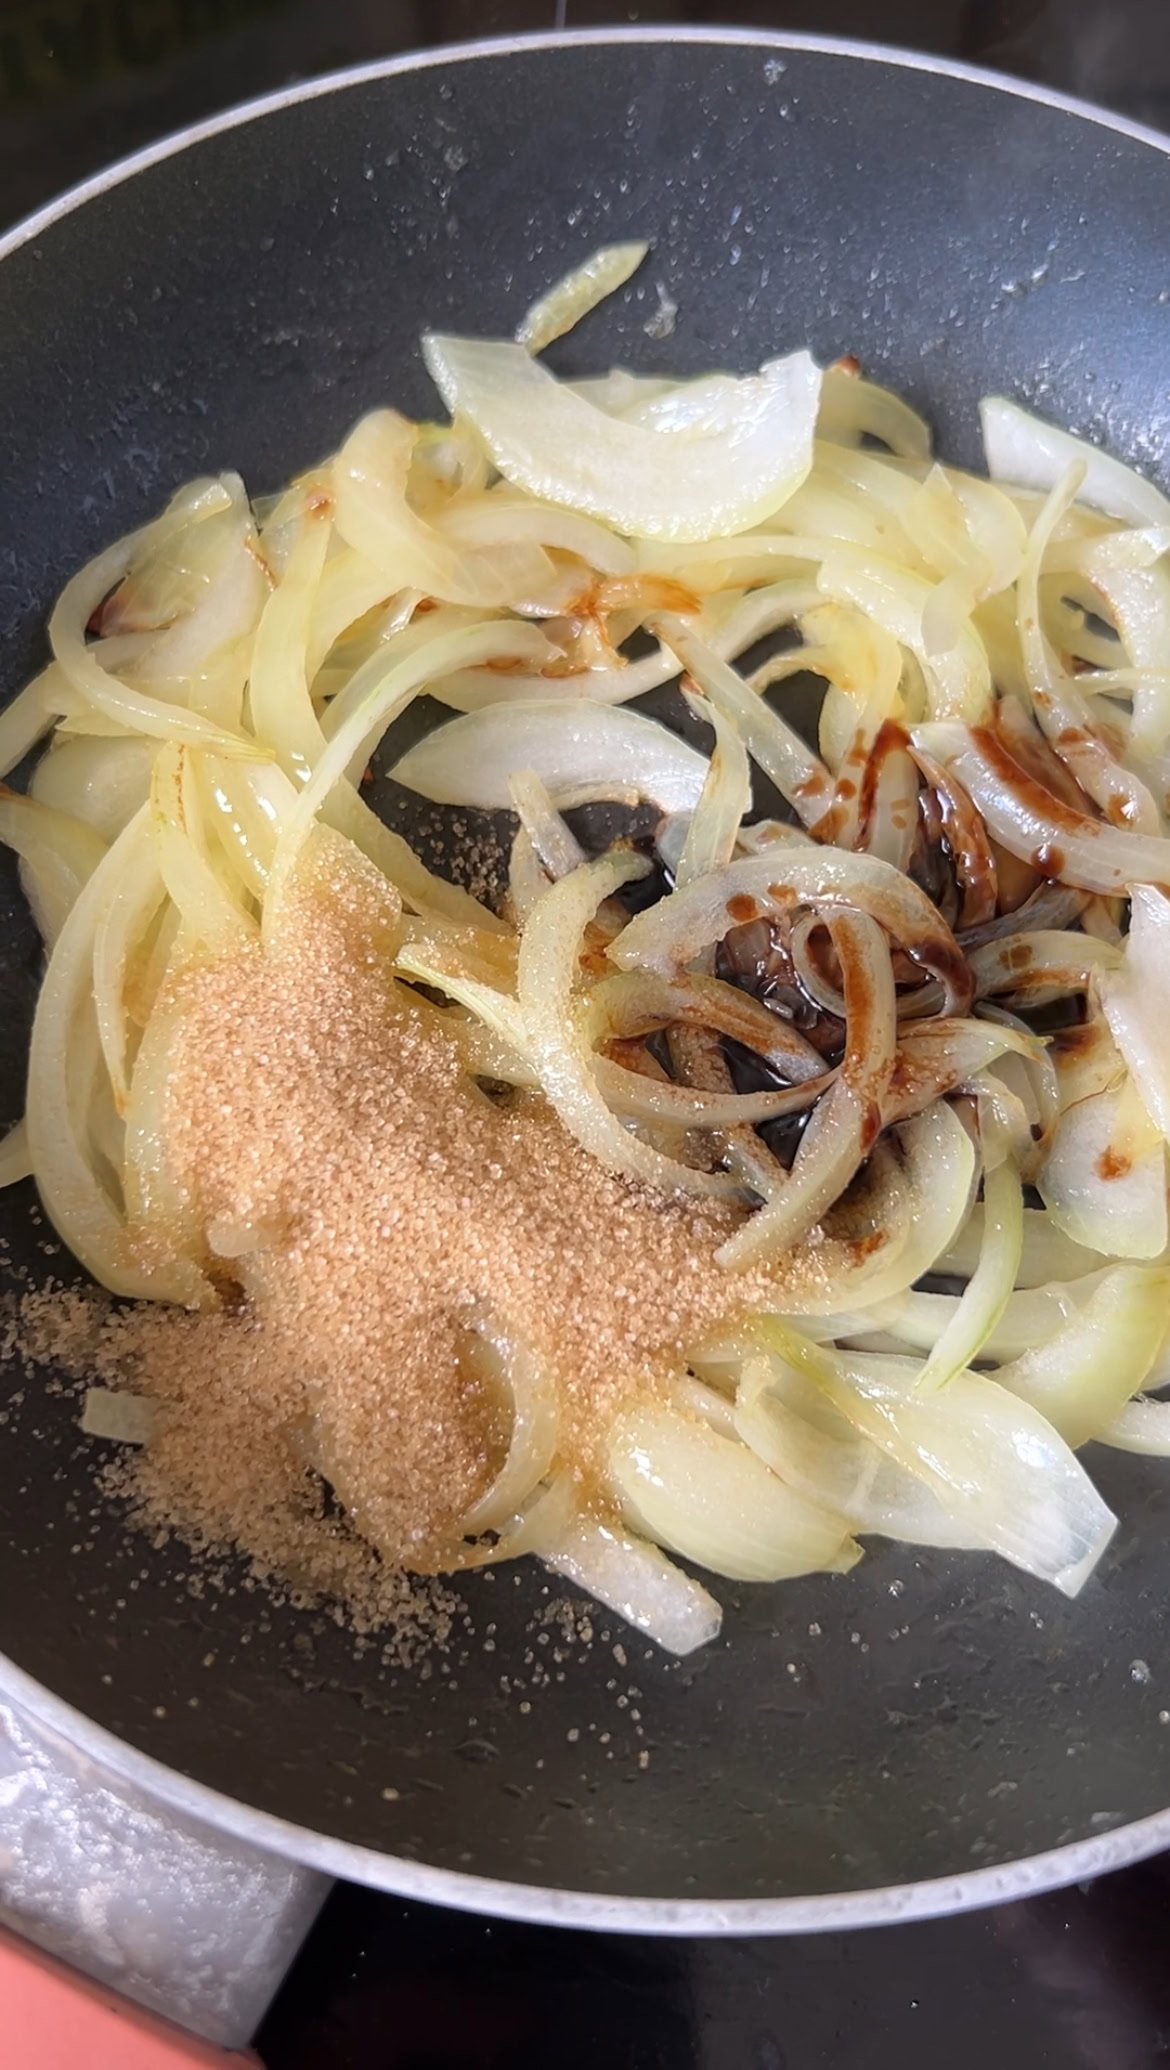 Vinegar added to onion slices as they cook.